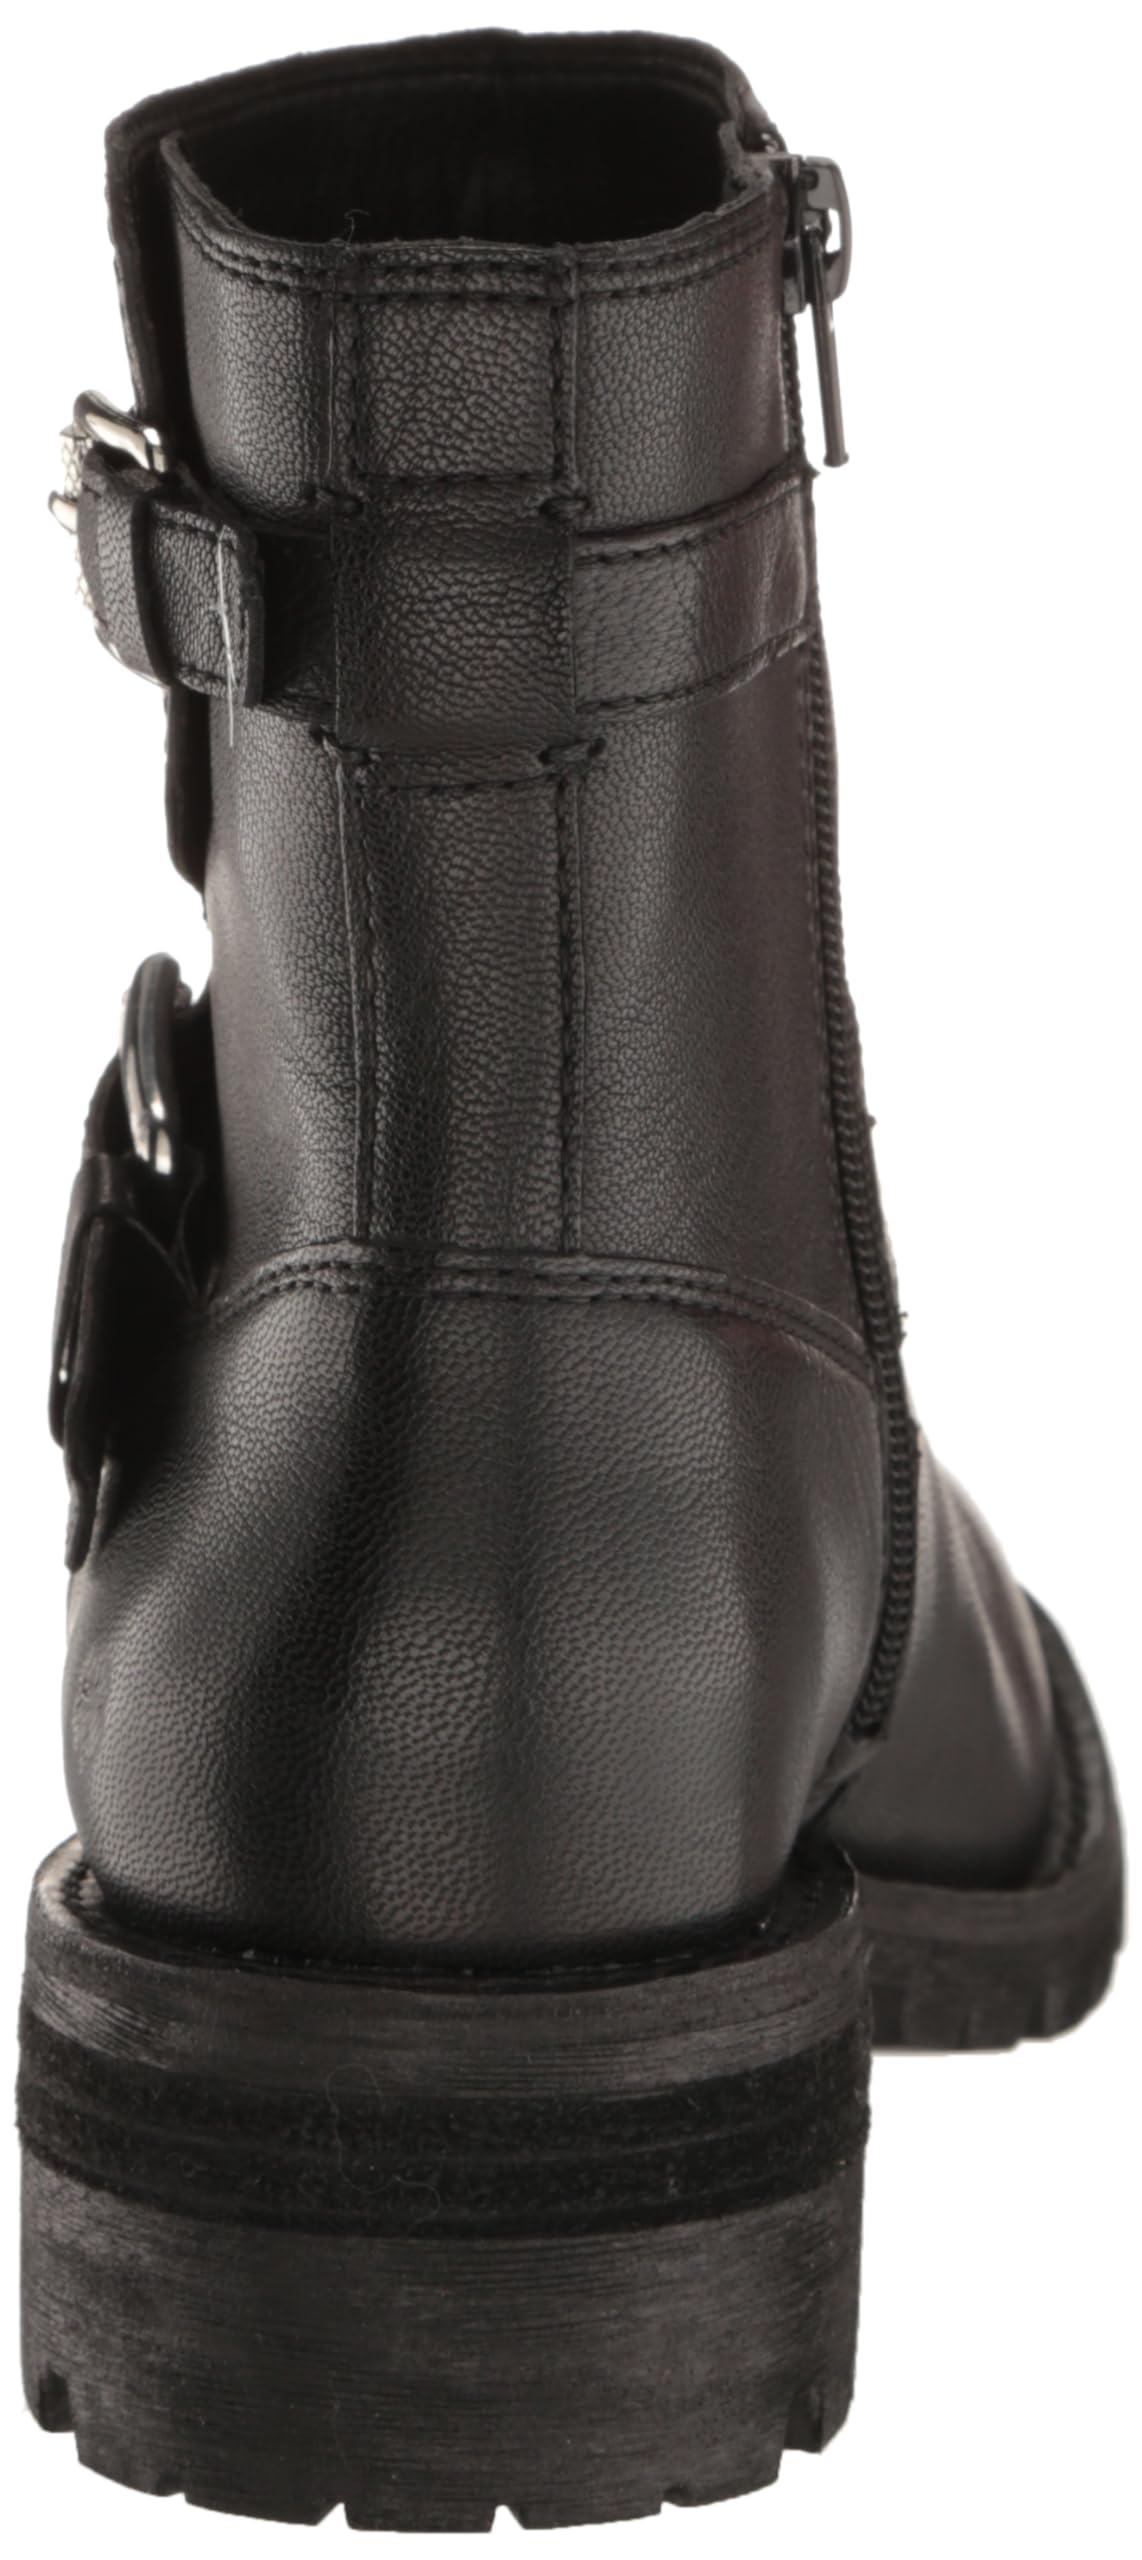 Lucky Brand Women's Taini Motorcycle Bootie Boot